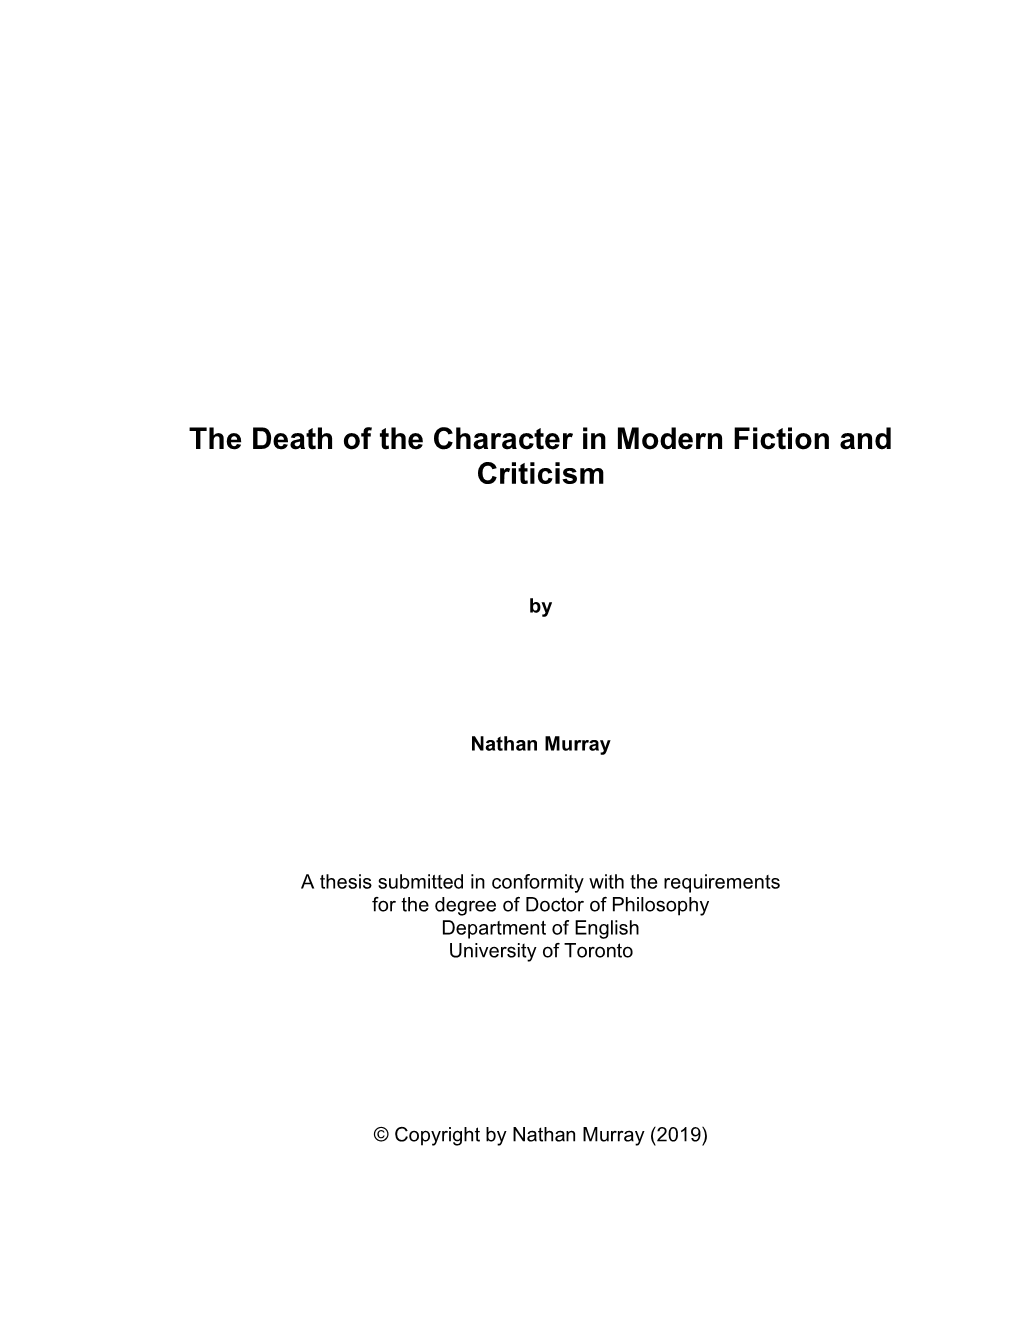 The Death of the Character in Modern Fiction and Criticism